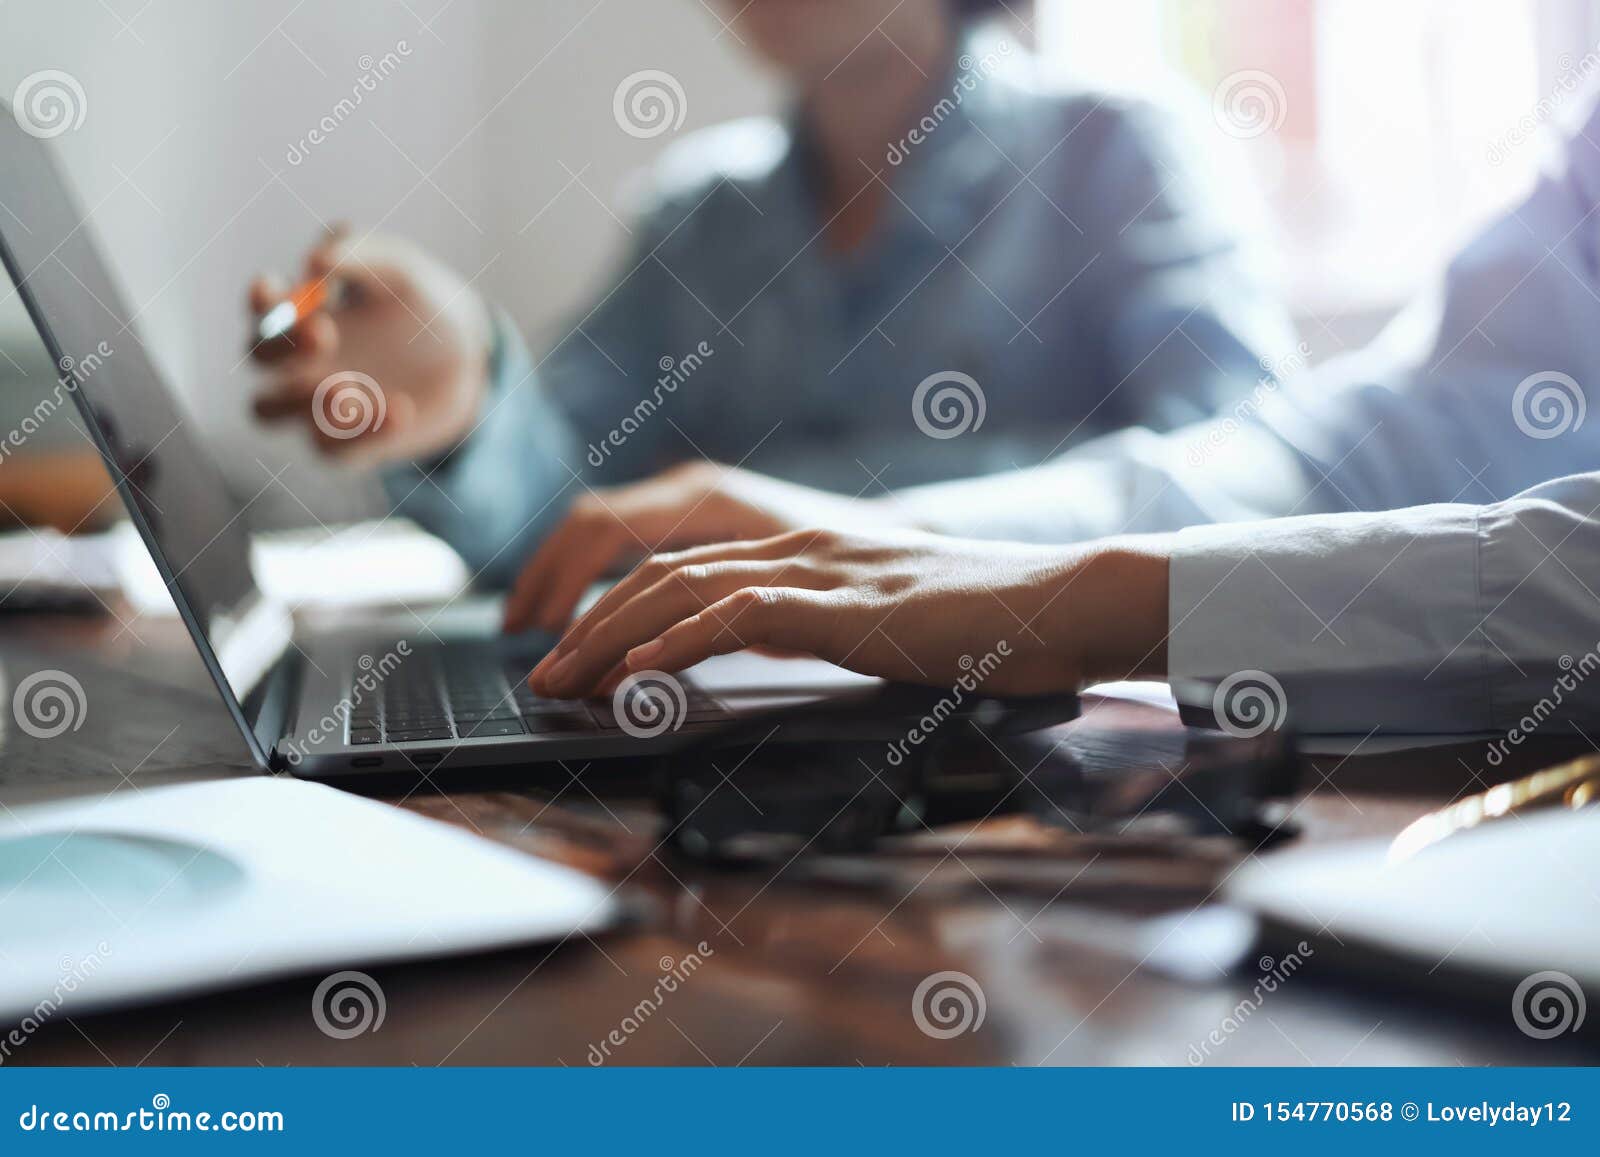 business woman using laptop hand typing on keyboard for meeting team in office. finance and accounting concept